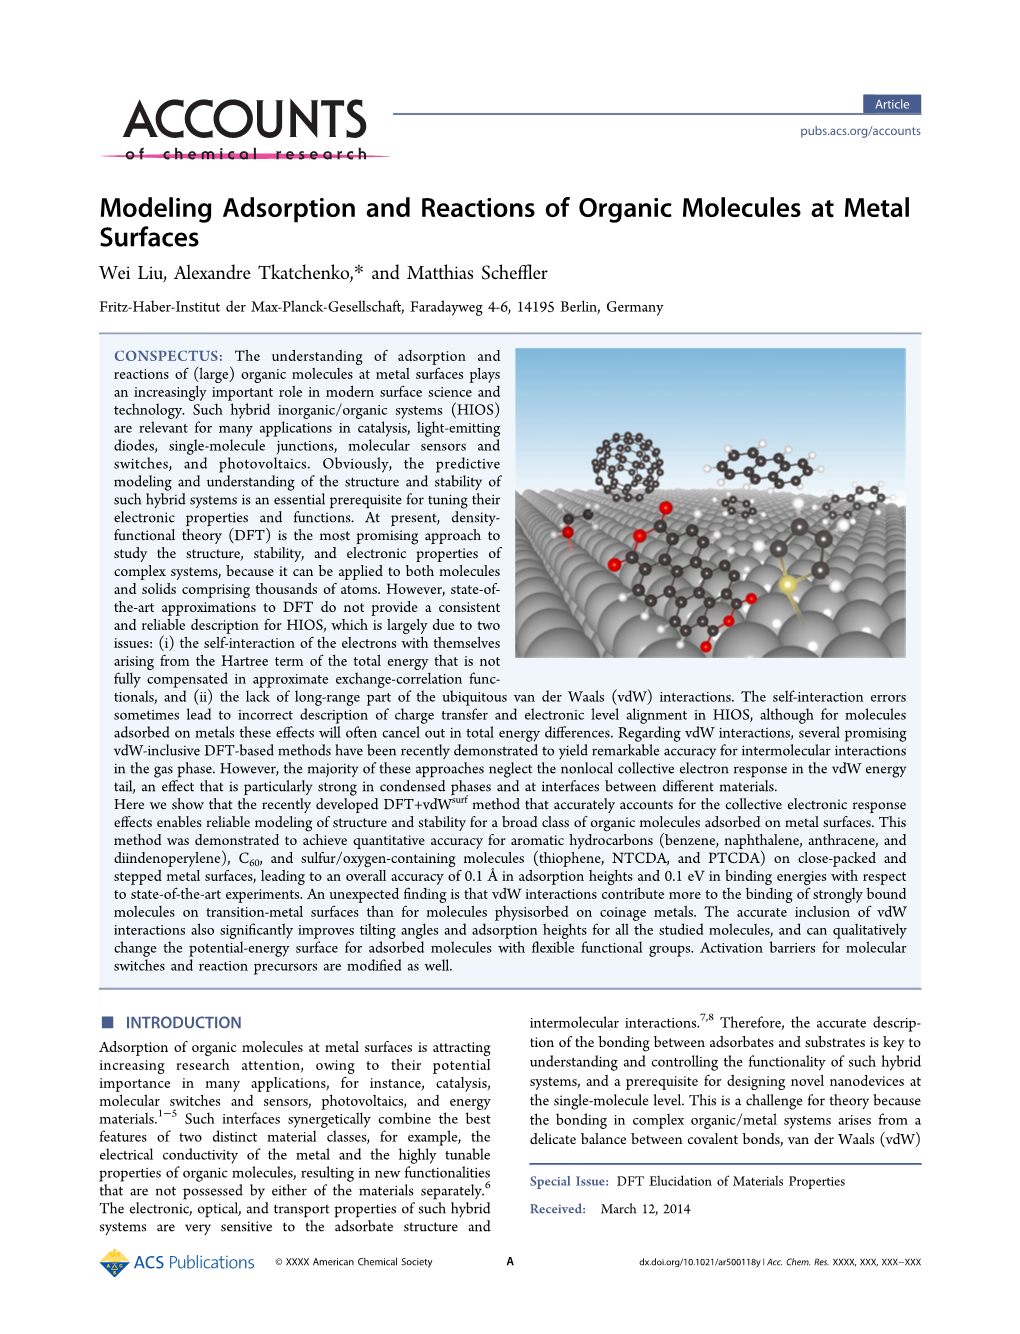 Modeling Adsorption and Reactions of Organic Molecules at Metal Surfaces Wei Liu, Alexandre Tkatchenko,* and Matthias Scheﬄer